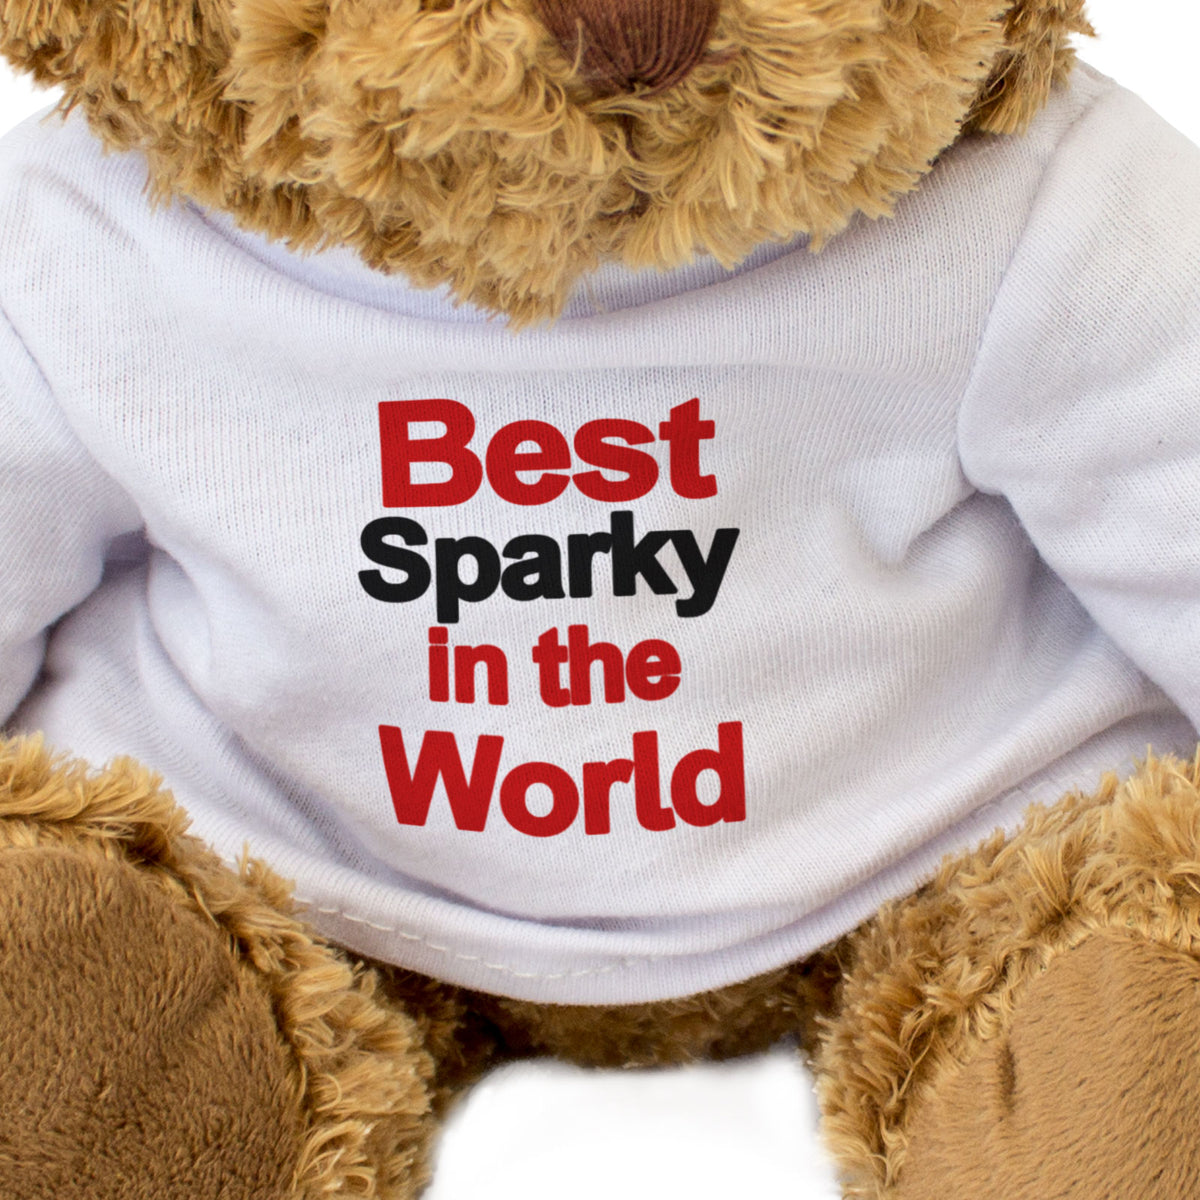 Best Sparky In The World Teddy Bear - Gift Present